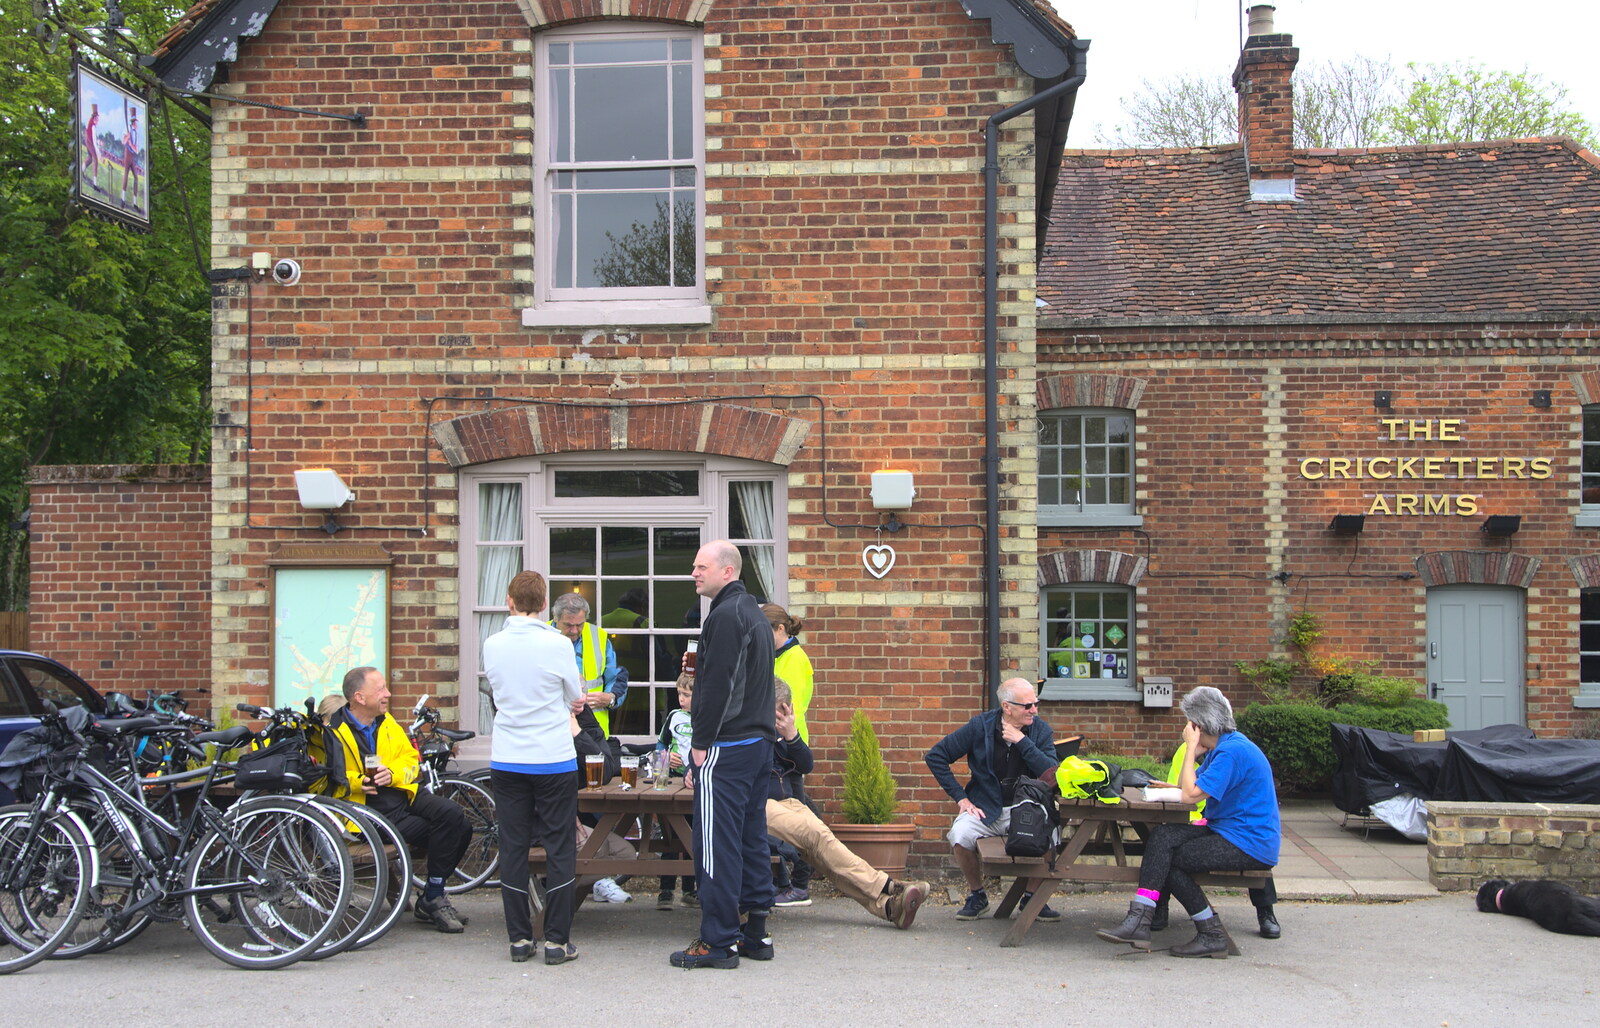 The Cricketer's Arms from The Last-Ever BSCC Weekend Away Bike Ride, Thaxted, Essex - 6th May 2017